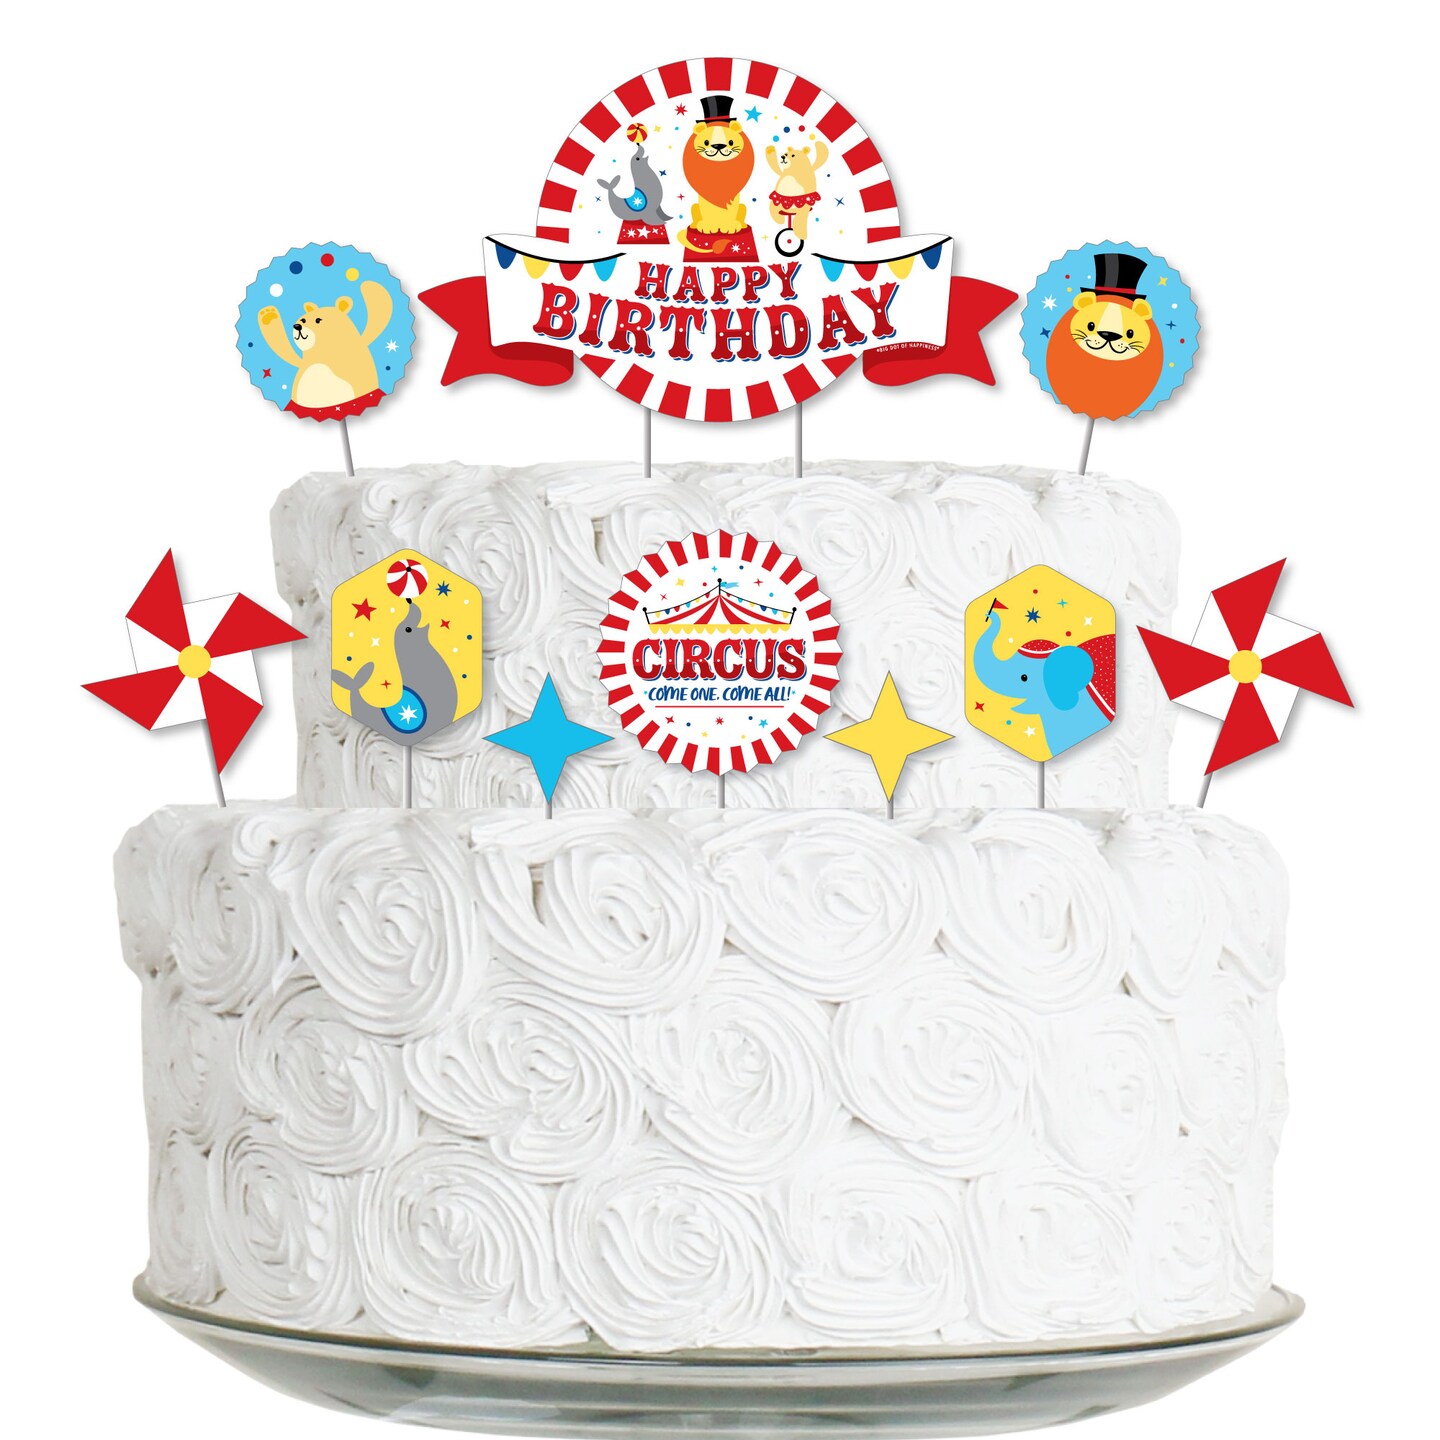 Carnival Cupcakes - 7501 – Cakes and Memories Bakeshop